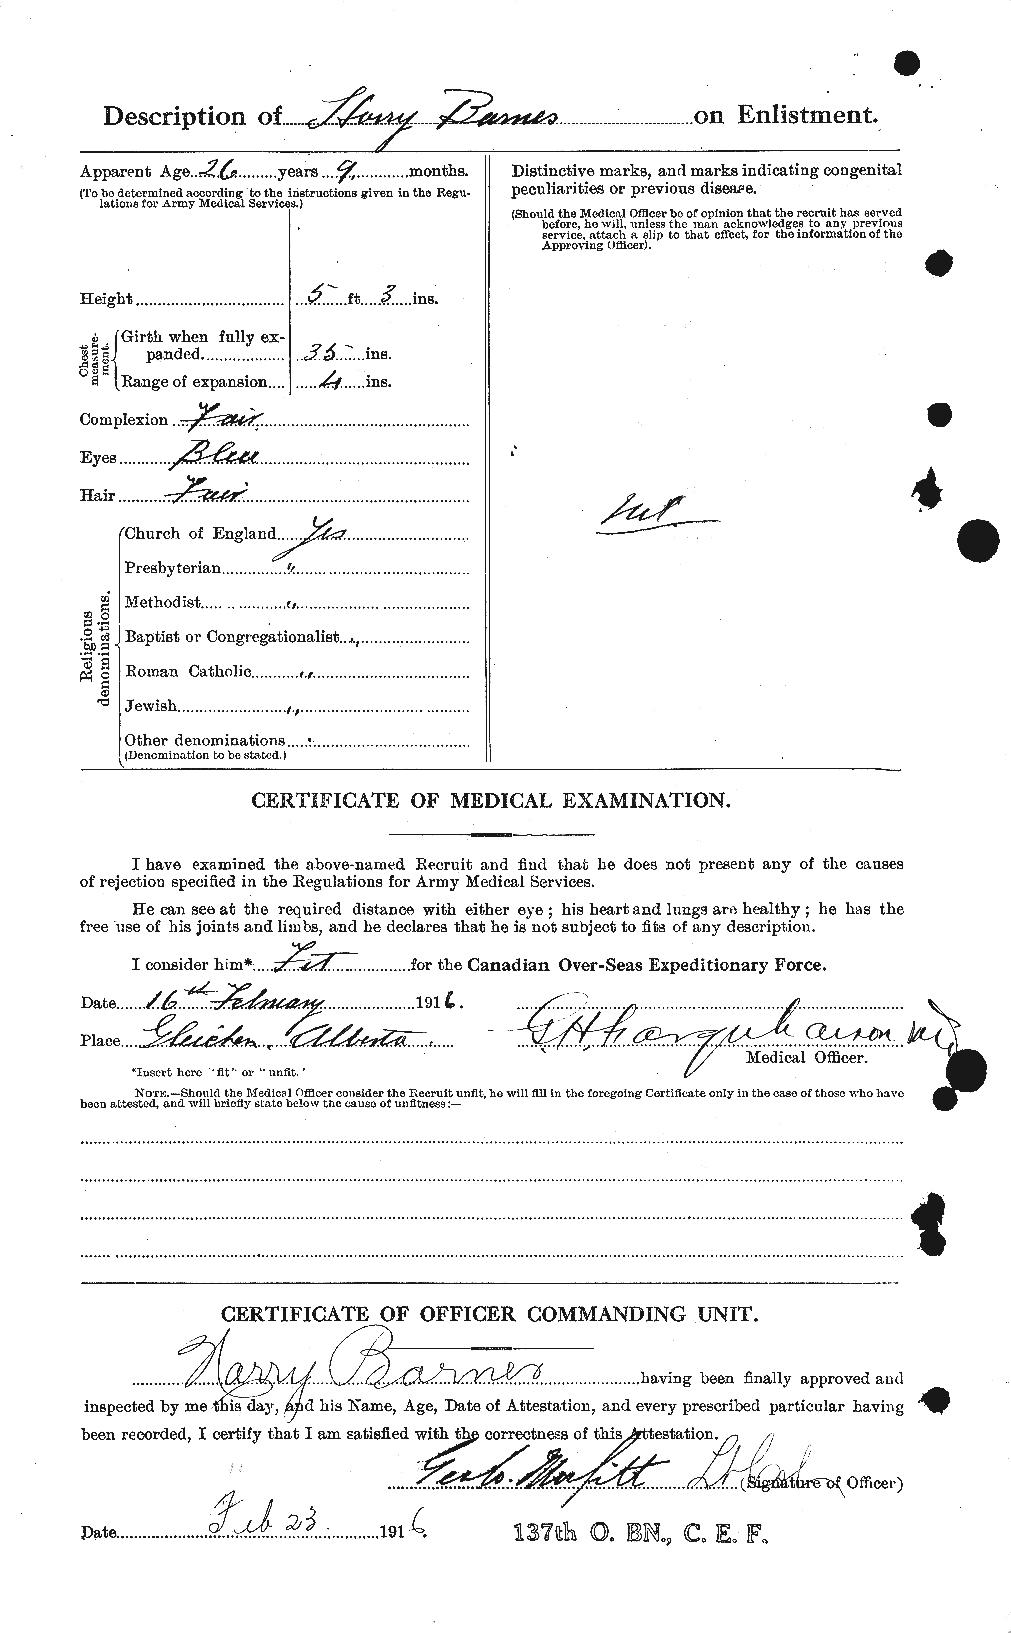 Personnel Records of the First World War - CEF 222485b